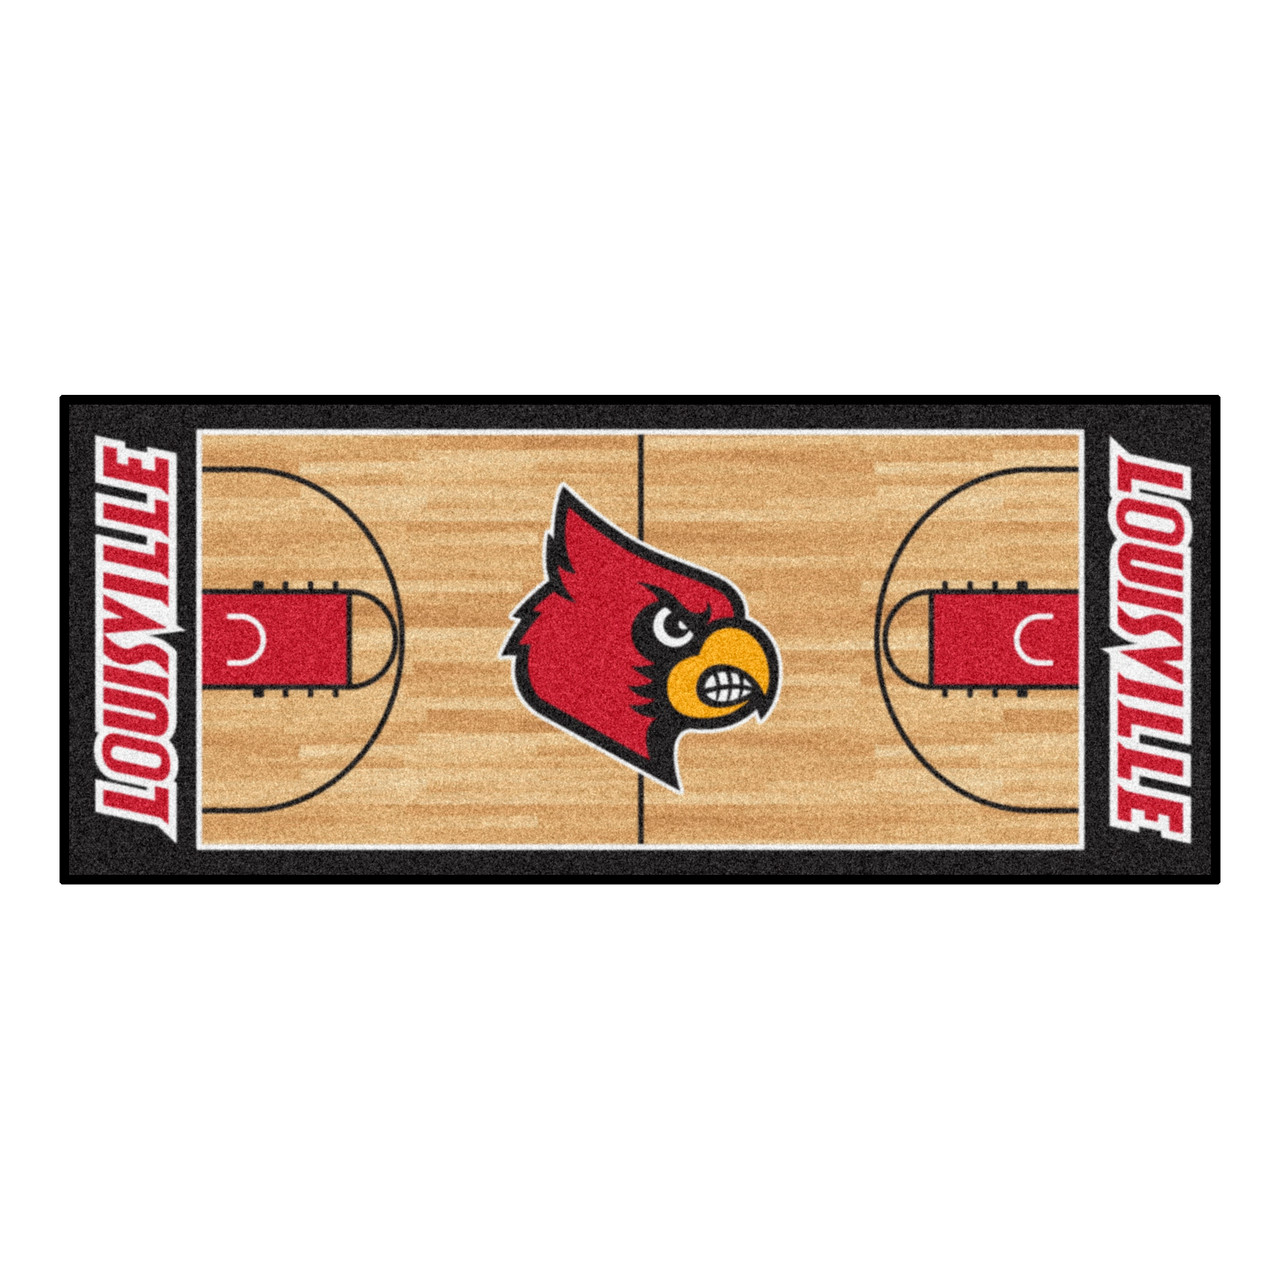 Officially Licensed NCAA Louisville Cardinals Football Rug